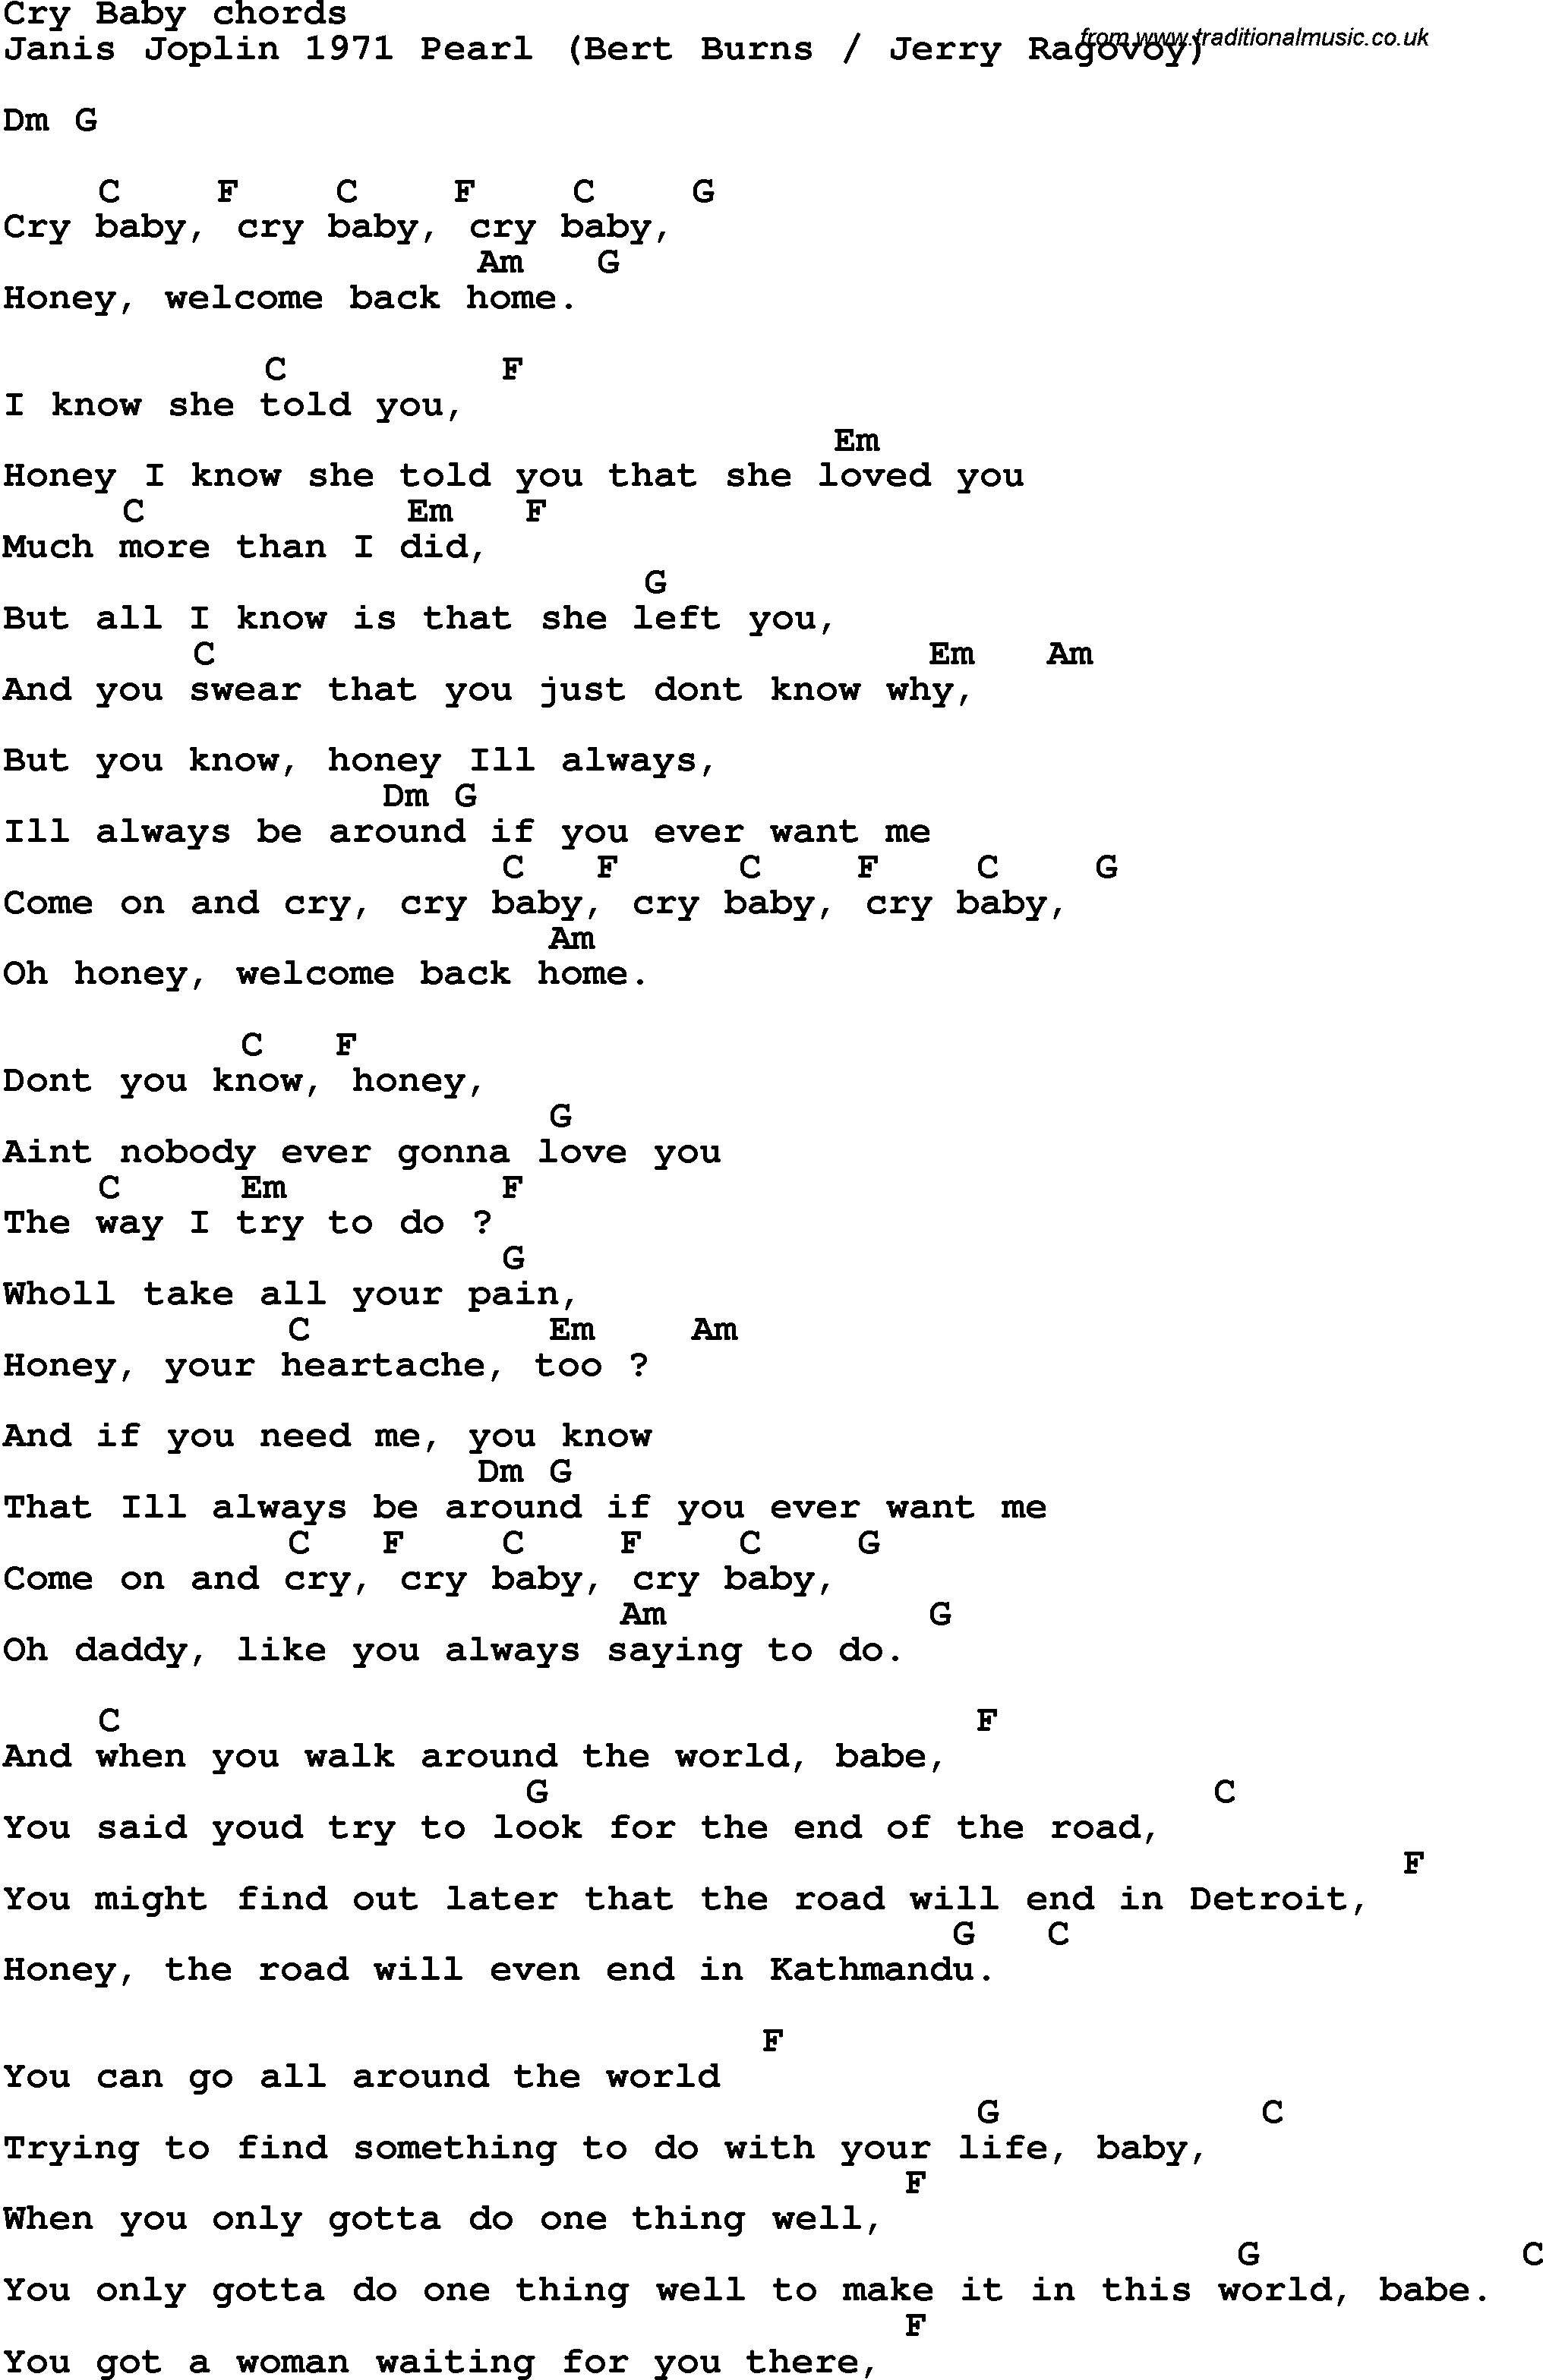 Song Lyrics with guitar chords for Cry Baby - Janis Joplin 1971